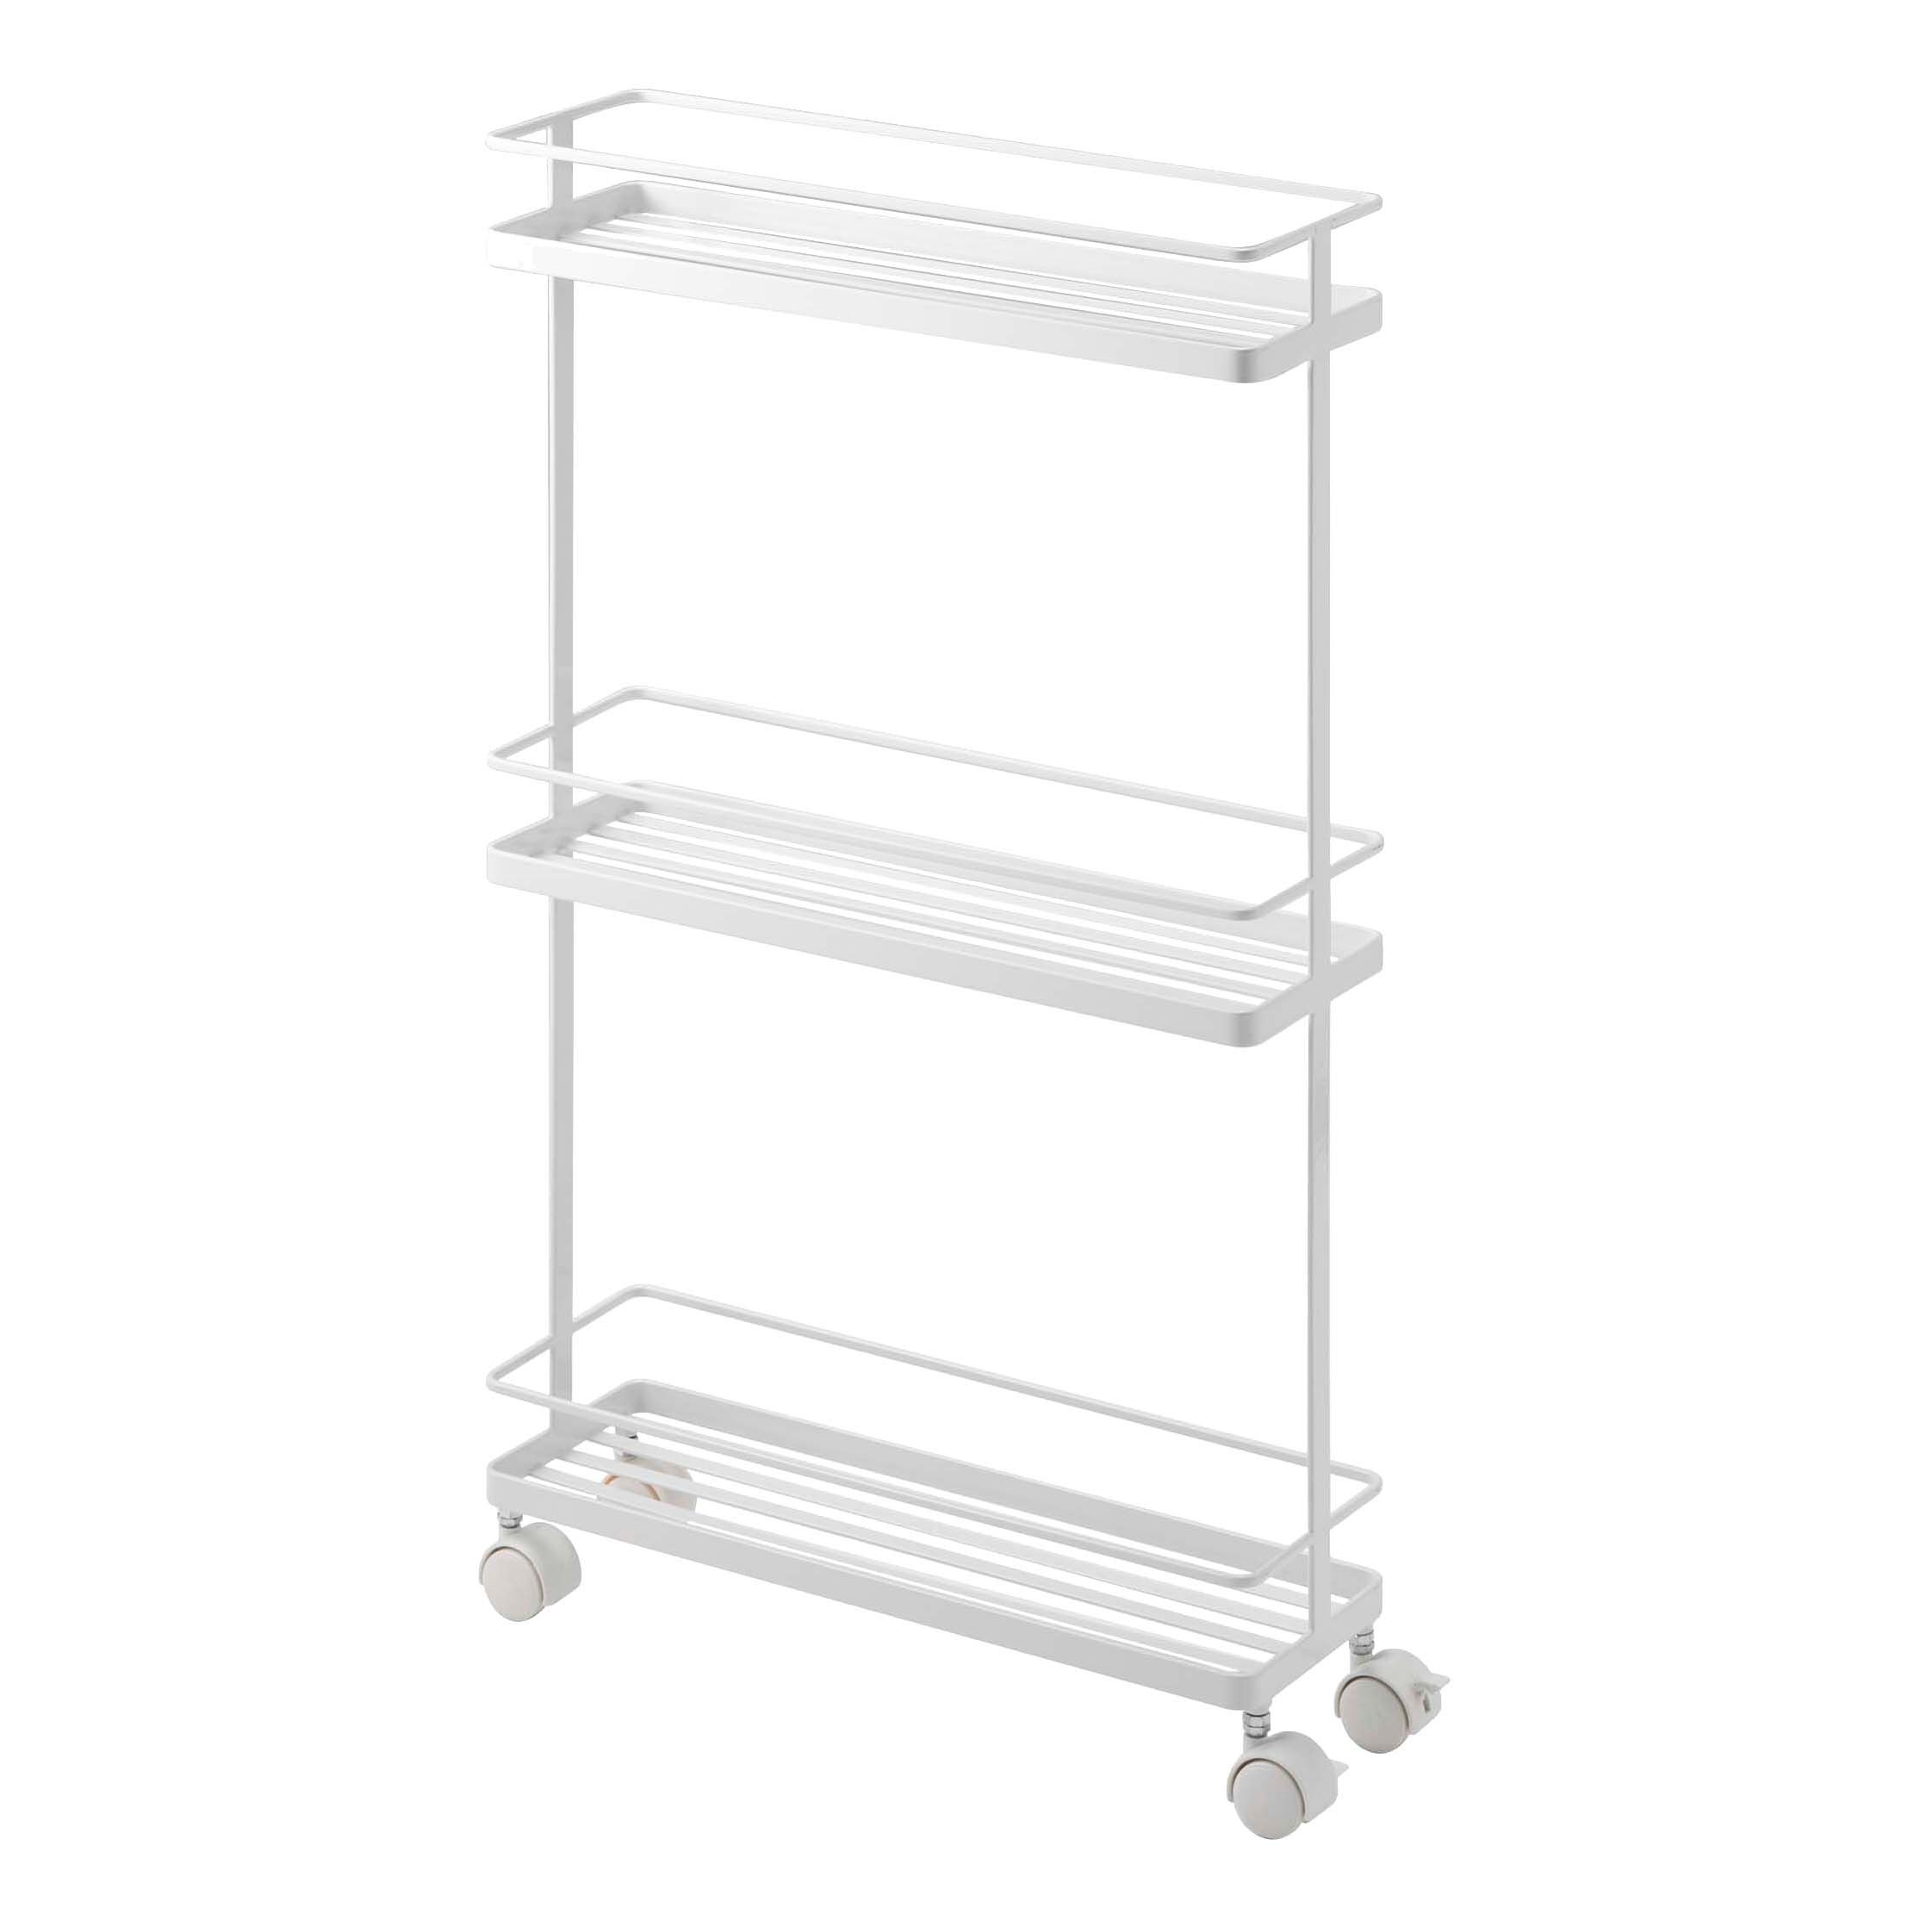 https://www.containerstore.com/catalogimages/488914/orzycwQ0.jpg